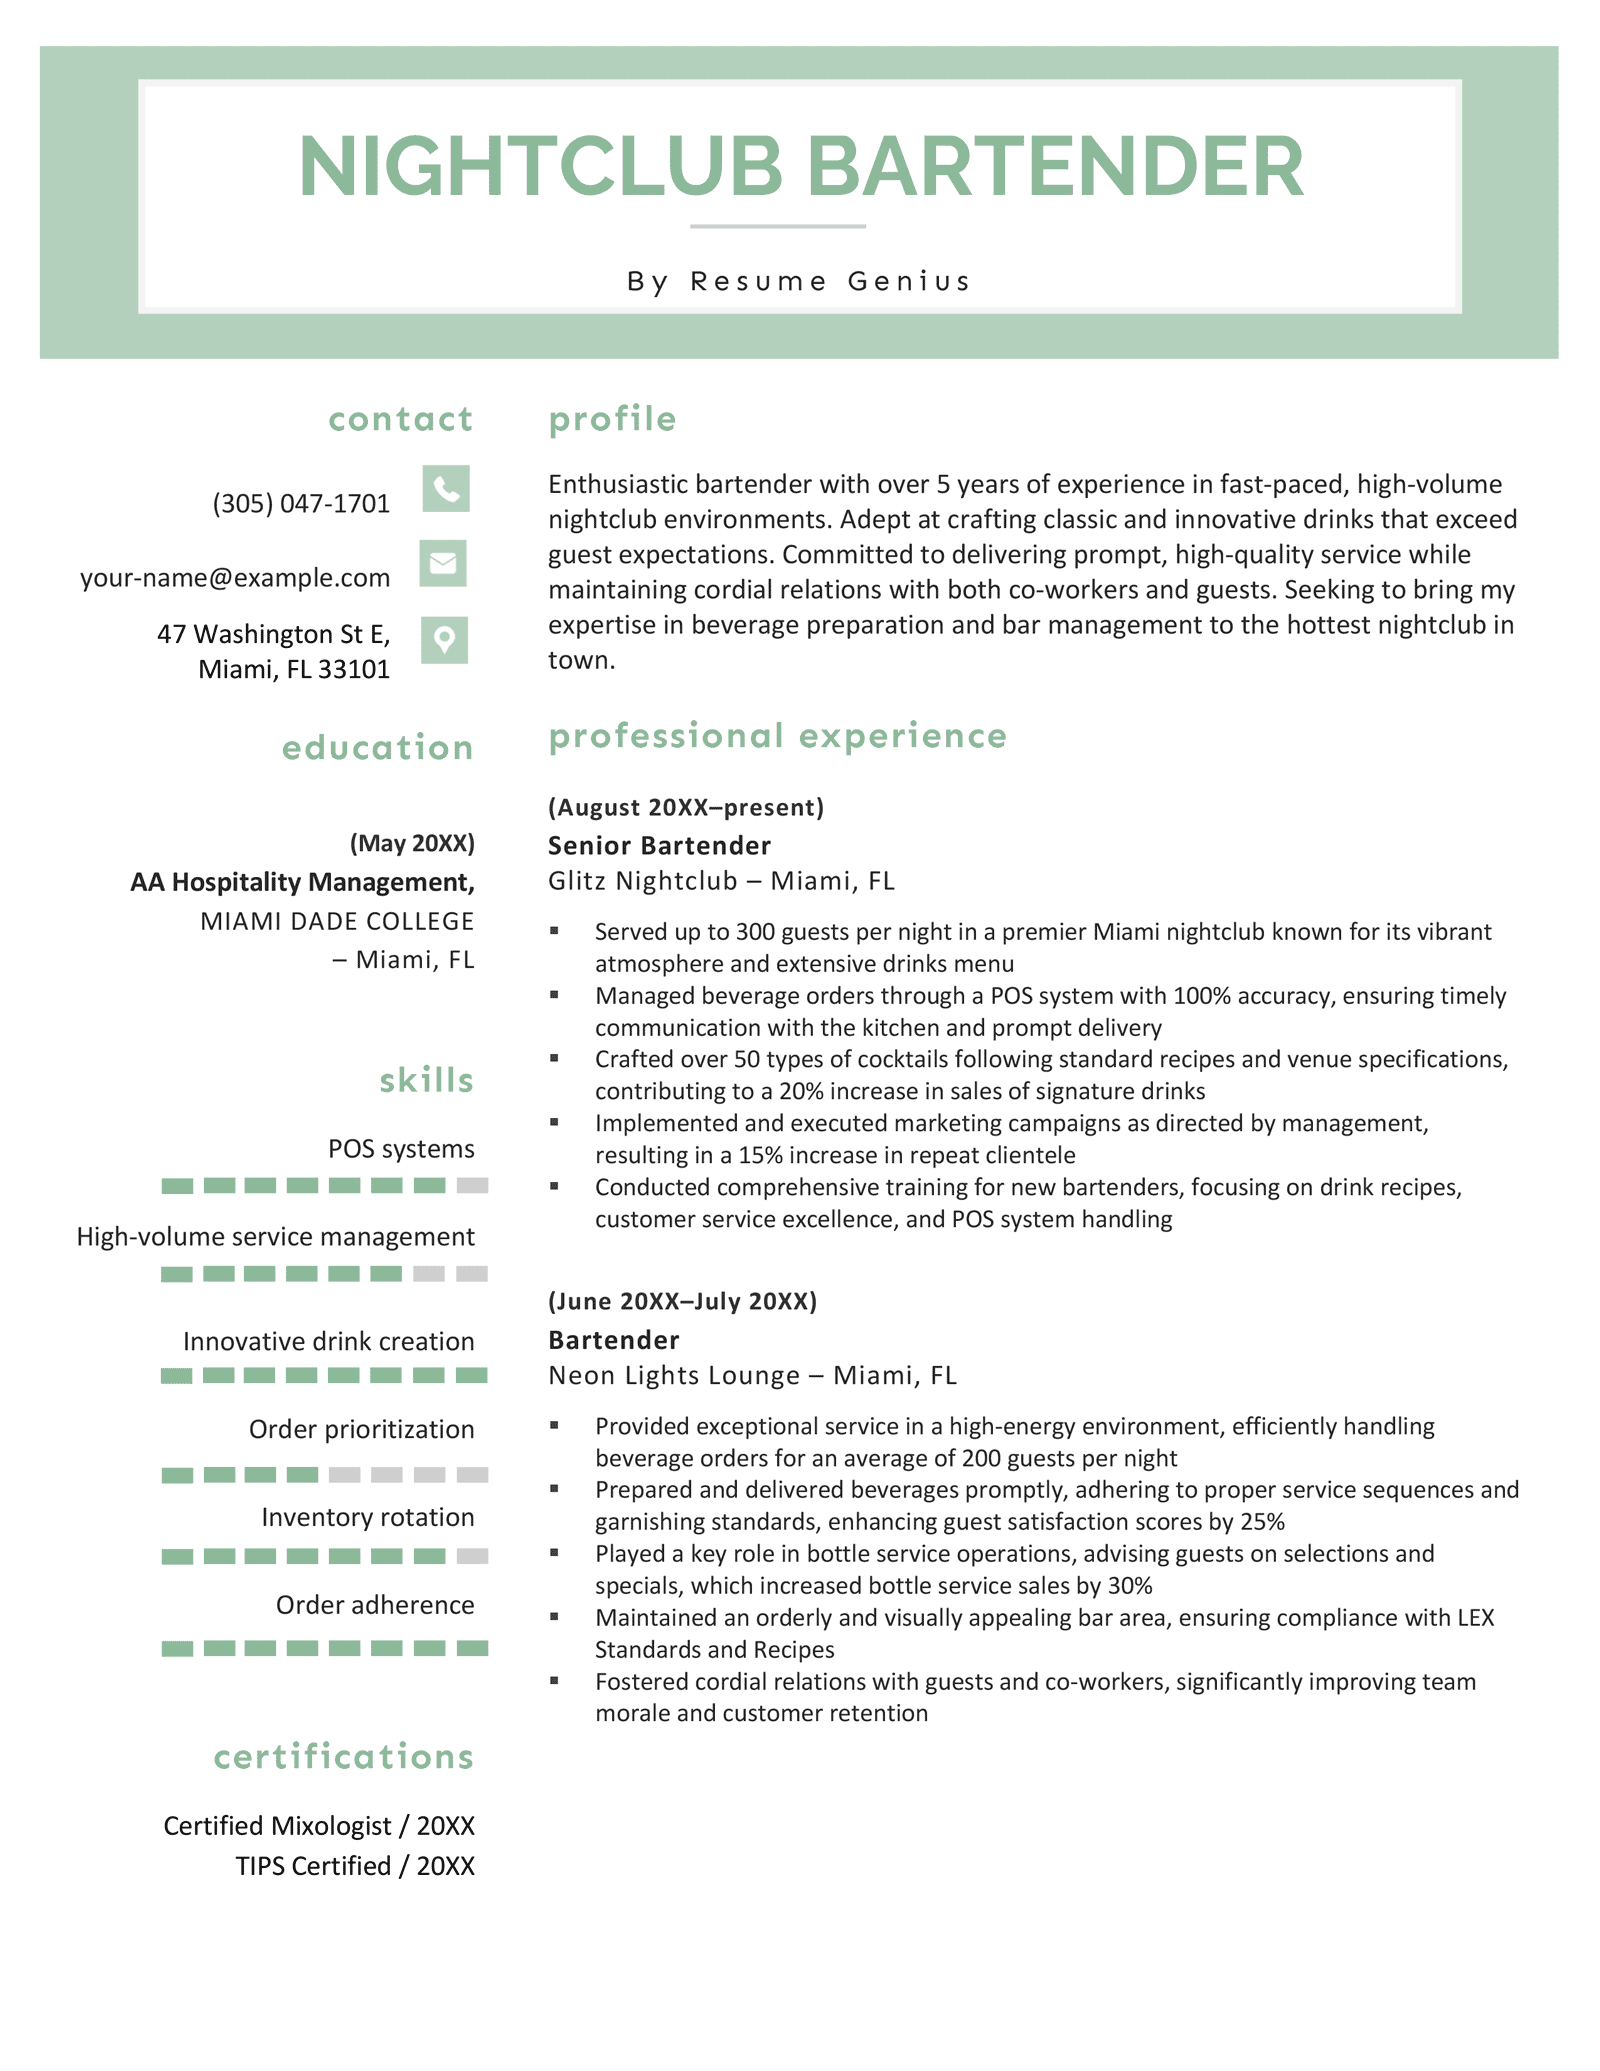 A nightclub bartender resume example with a green color scheme that outlines two previous job experiences and uses skill bars to describes the skills of the applicants.